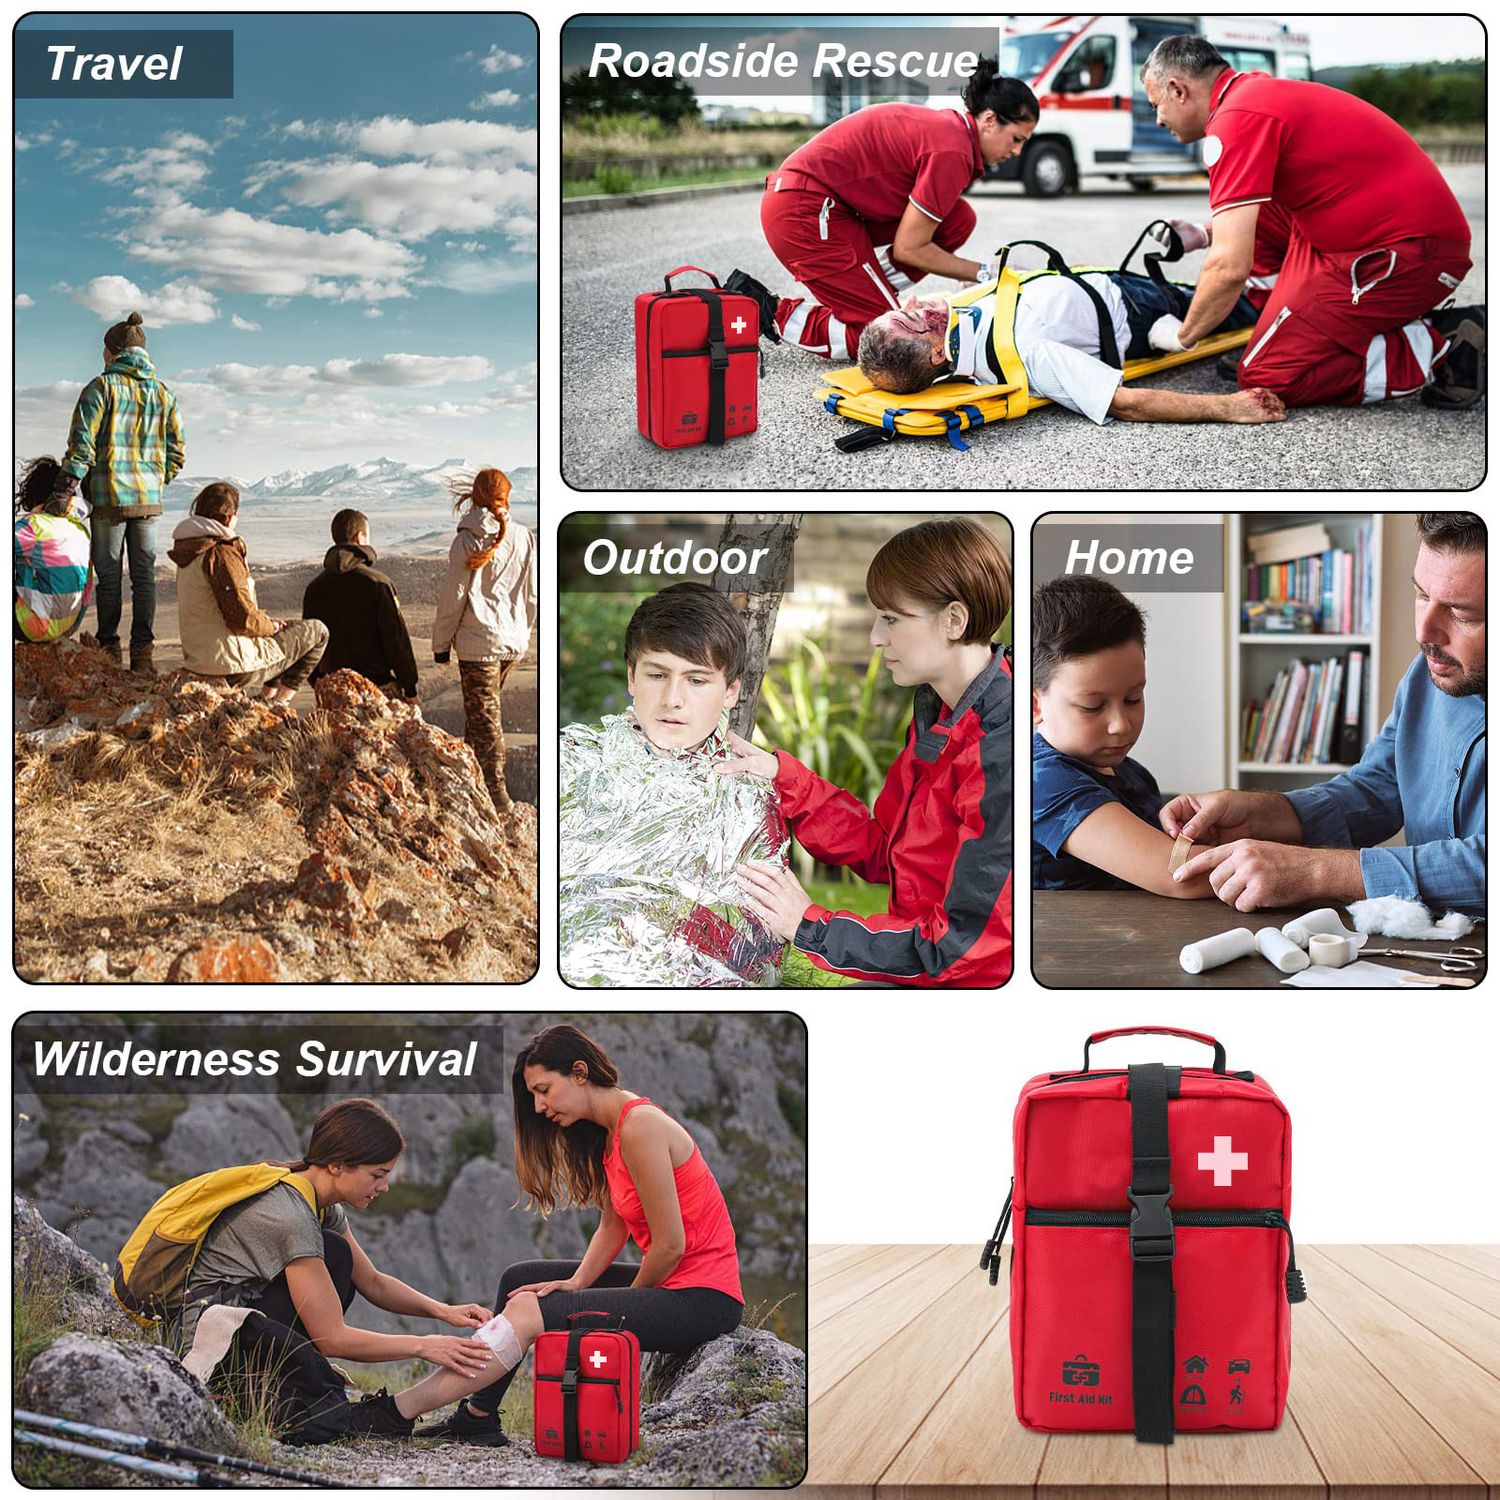 Various applications of the large emergency medical kit in travel, outdoor, home, and roadside scenarios, showing its utility in different environments